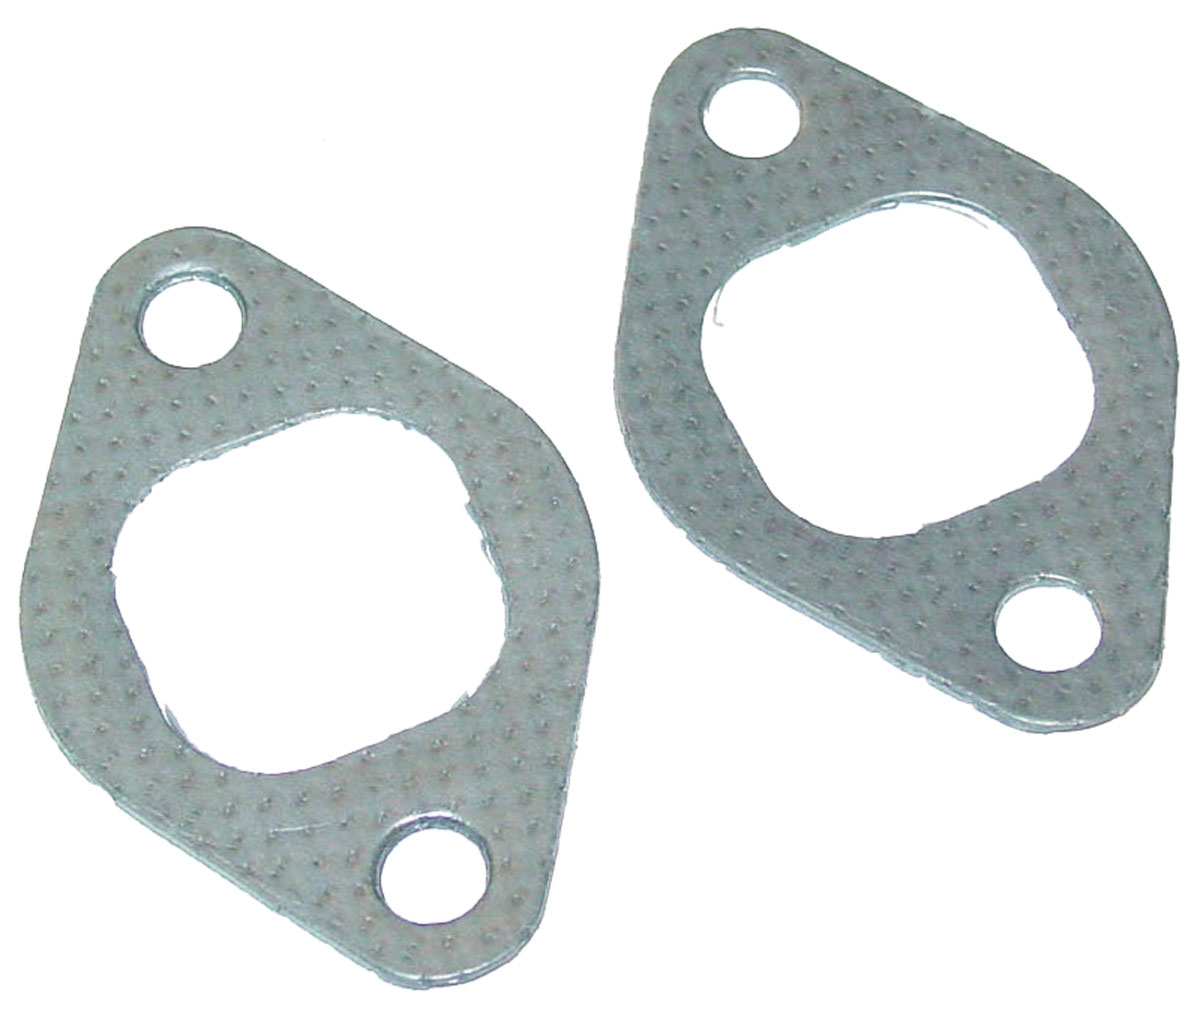 APUK Exhaust Manifold Gasket Set Compatible with Case International B275 B414 276 374 384 444 Tractor 